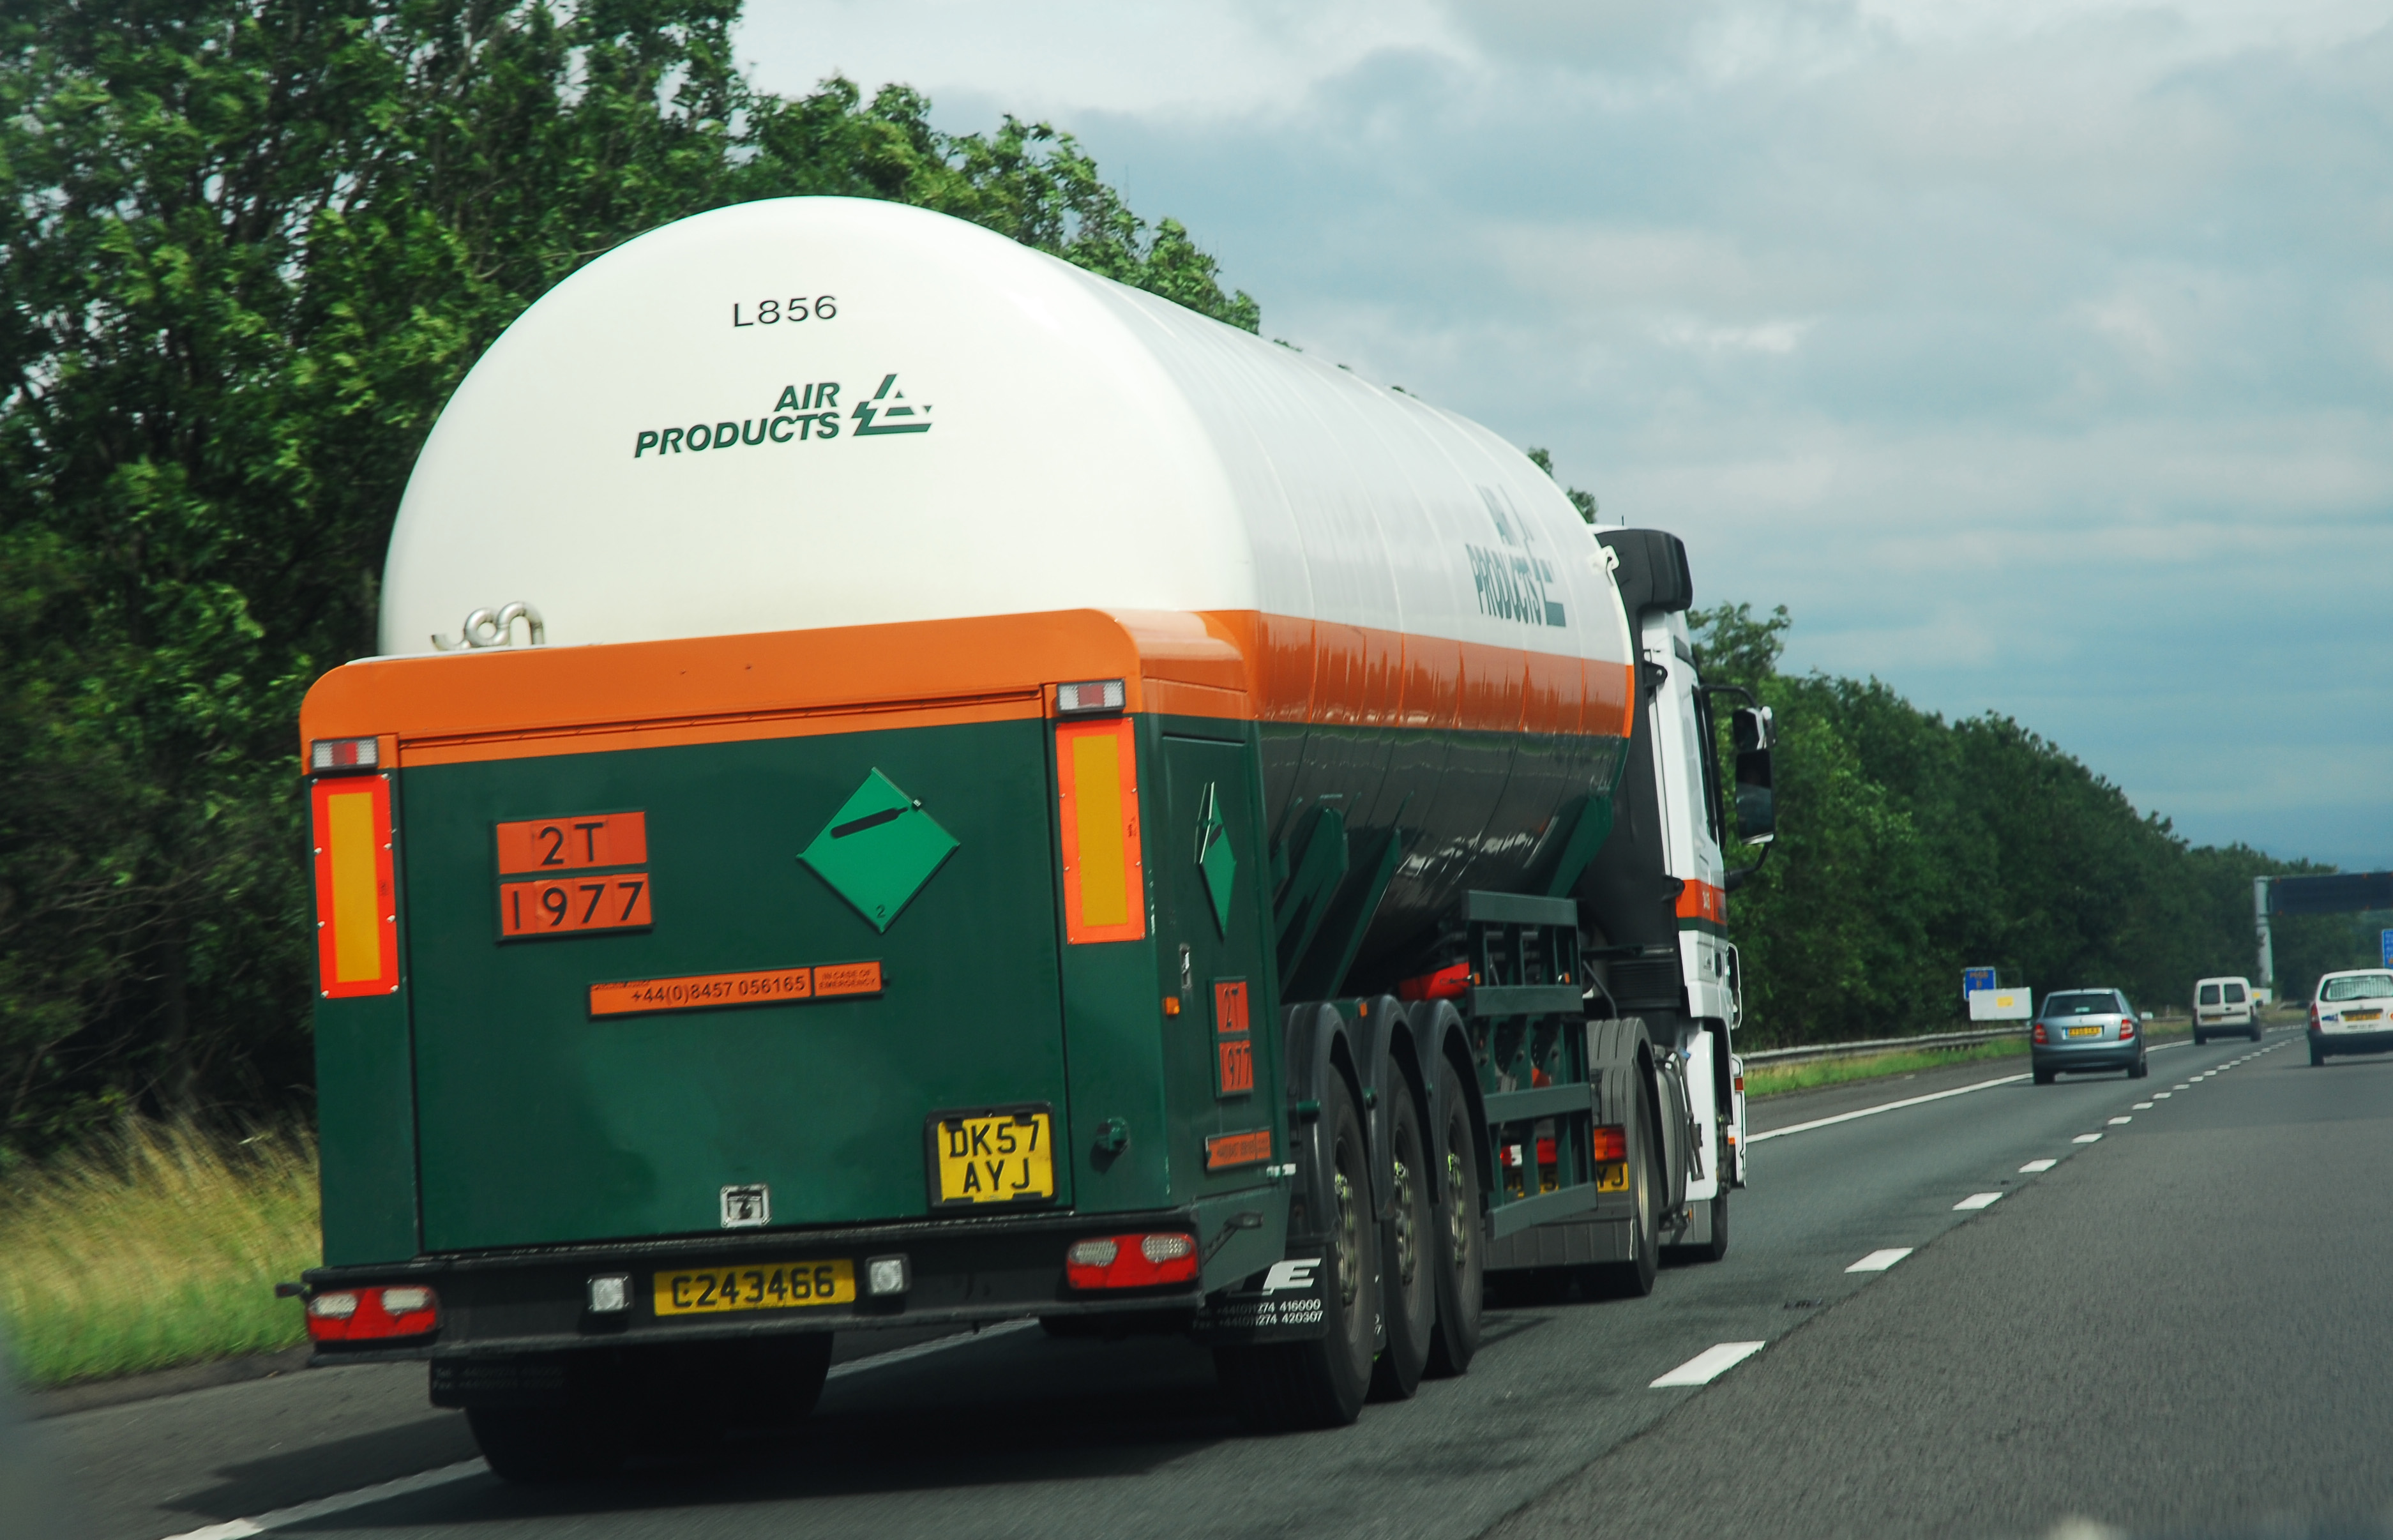 Air Products Tanker on the Motorway 8 x 10 inch Photo Print  4.99